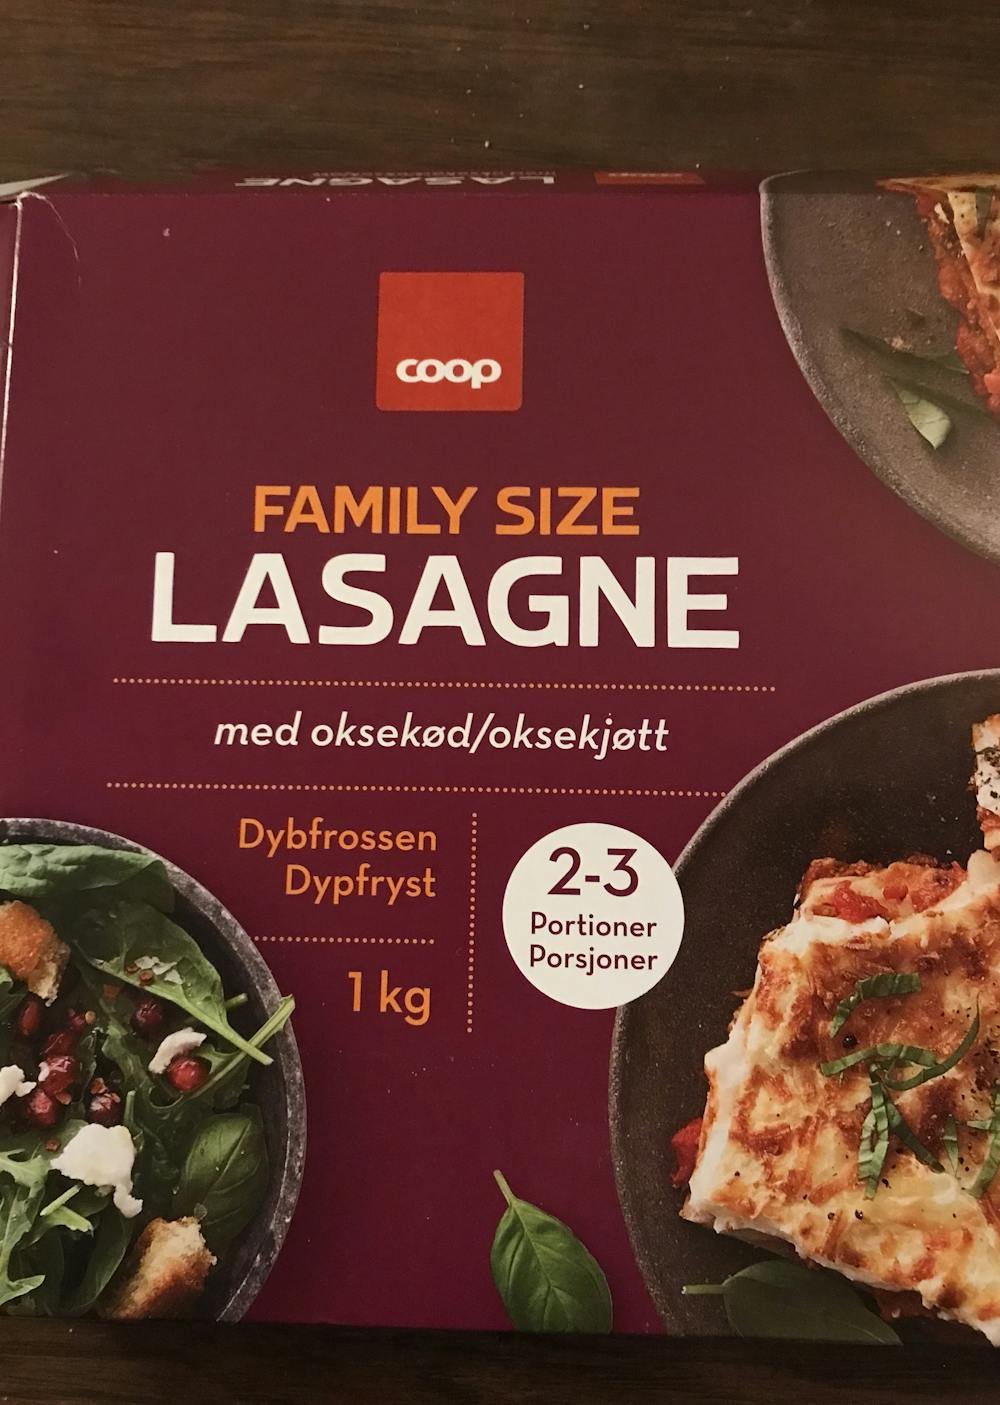 Family size lasagne, Coop